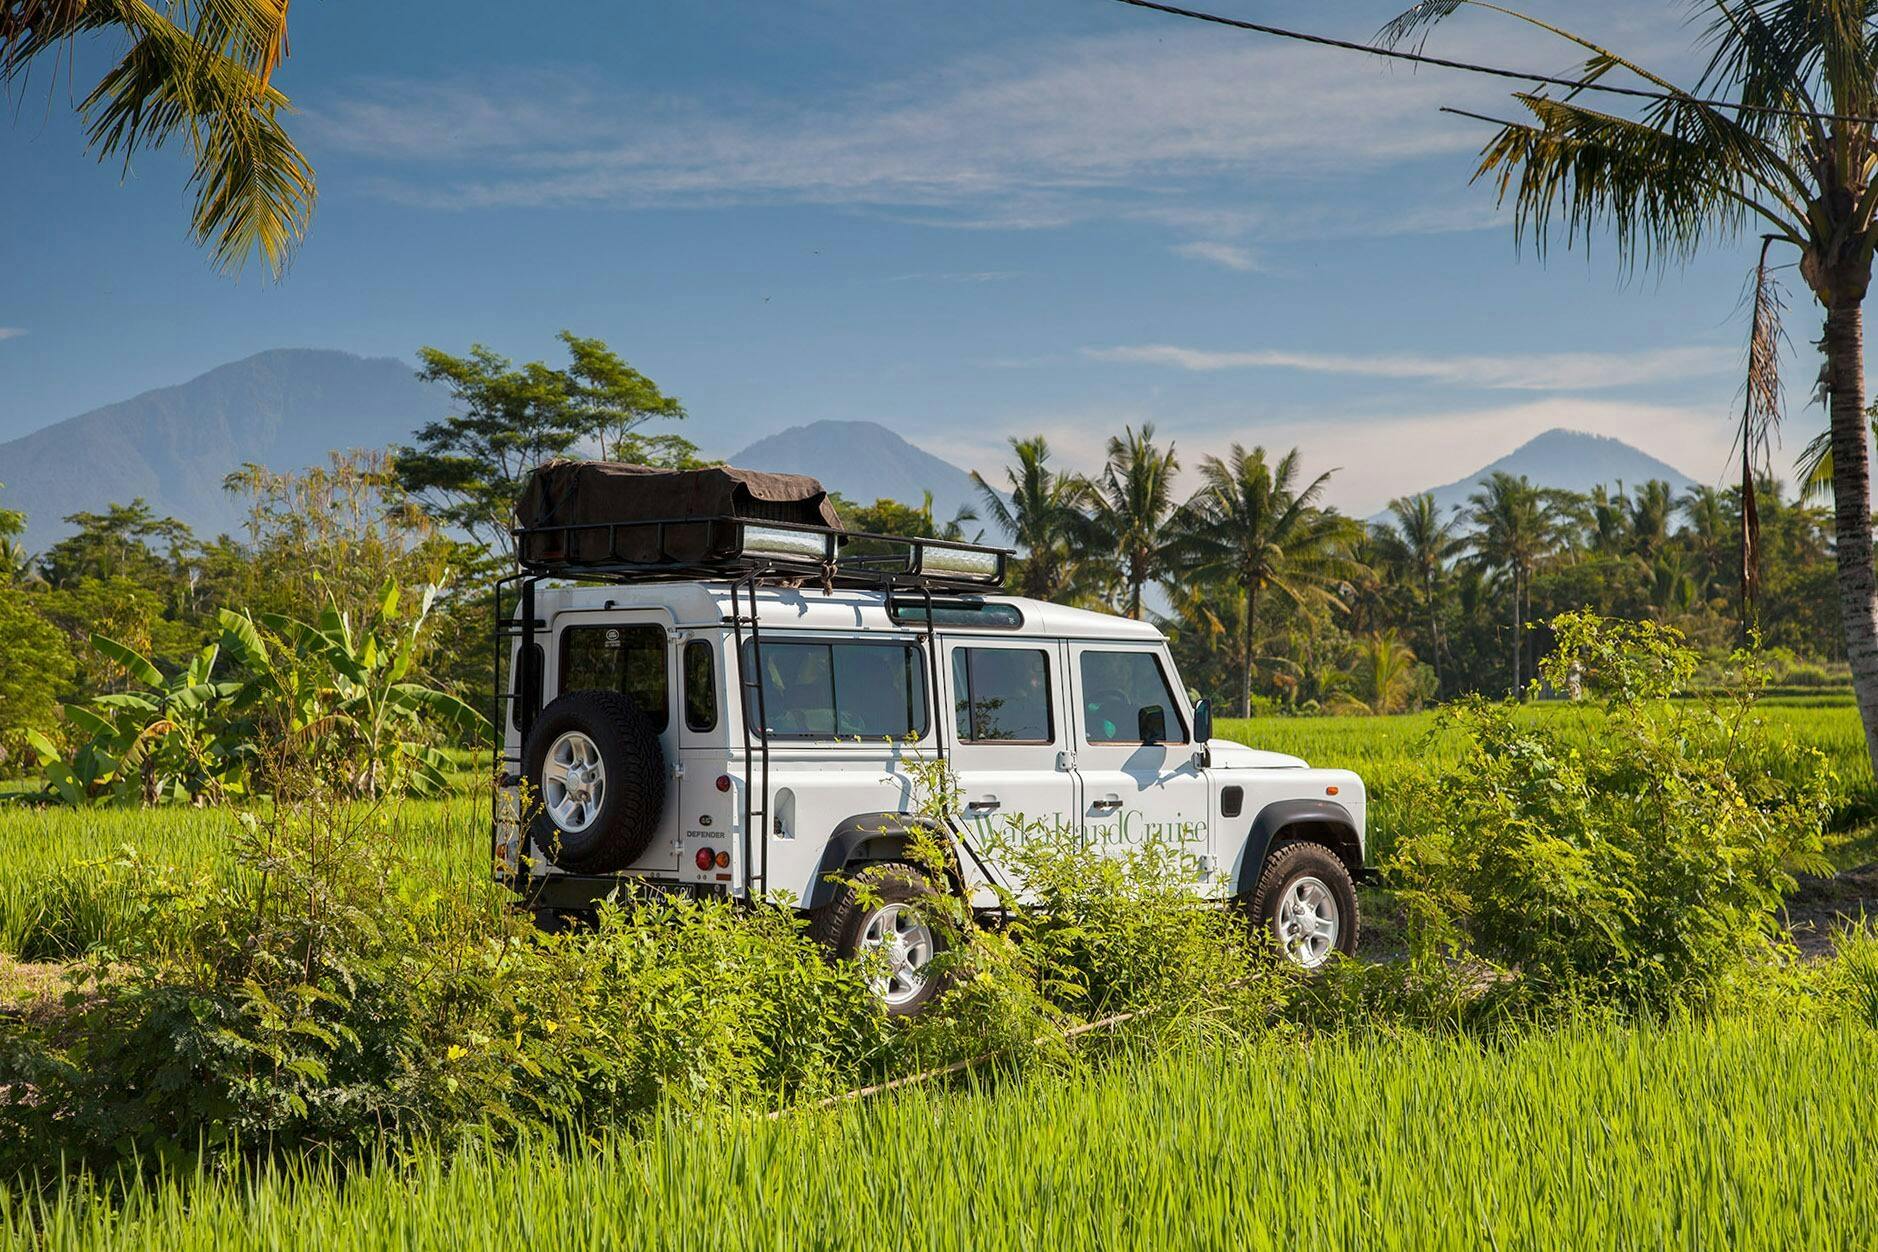 Wakaland Land-Rover Adventure with Lunch